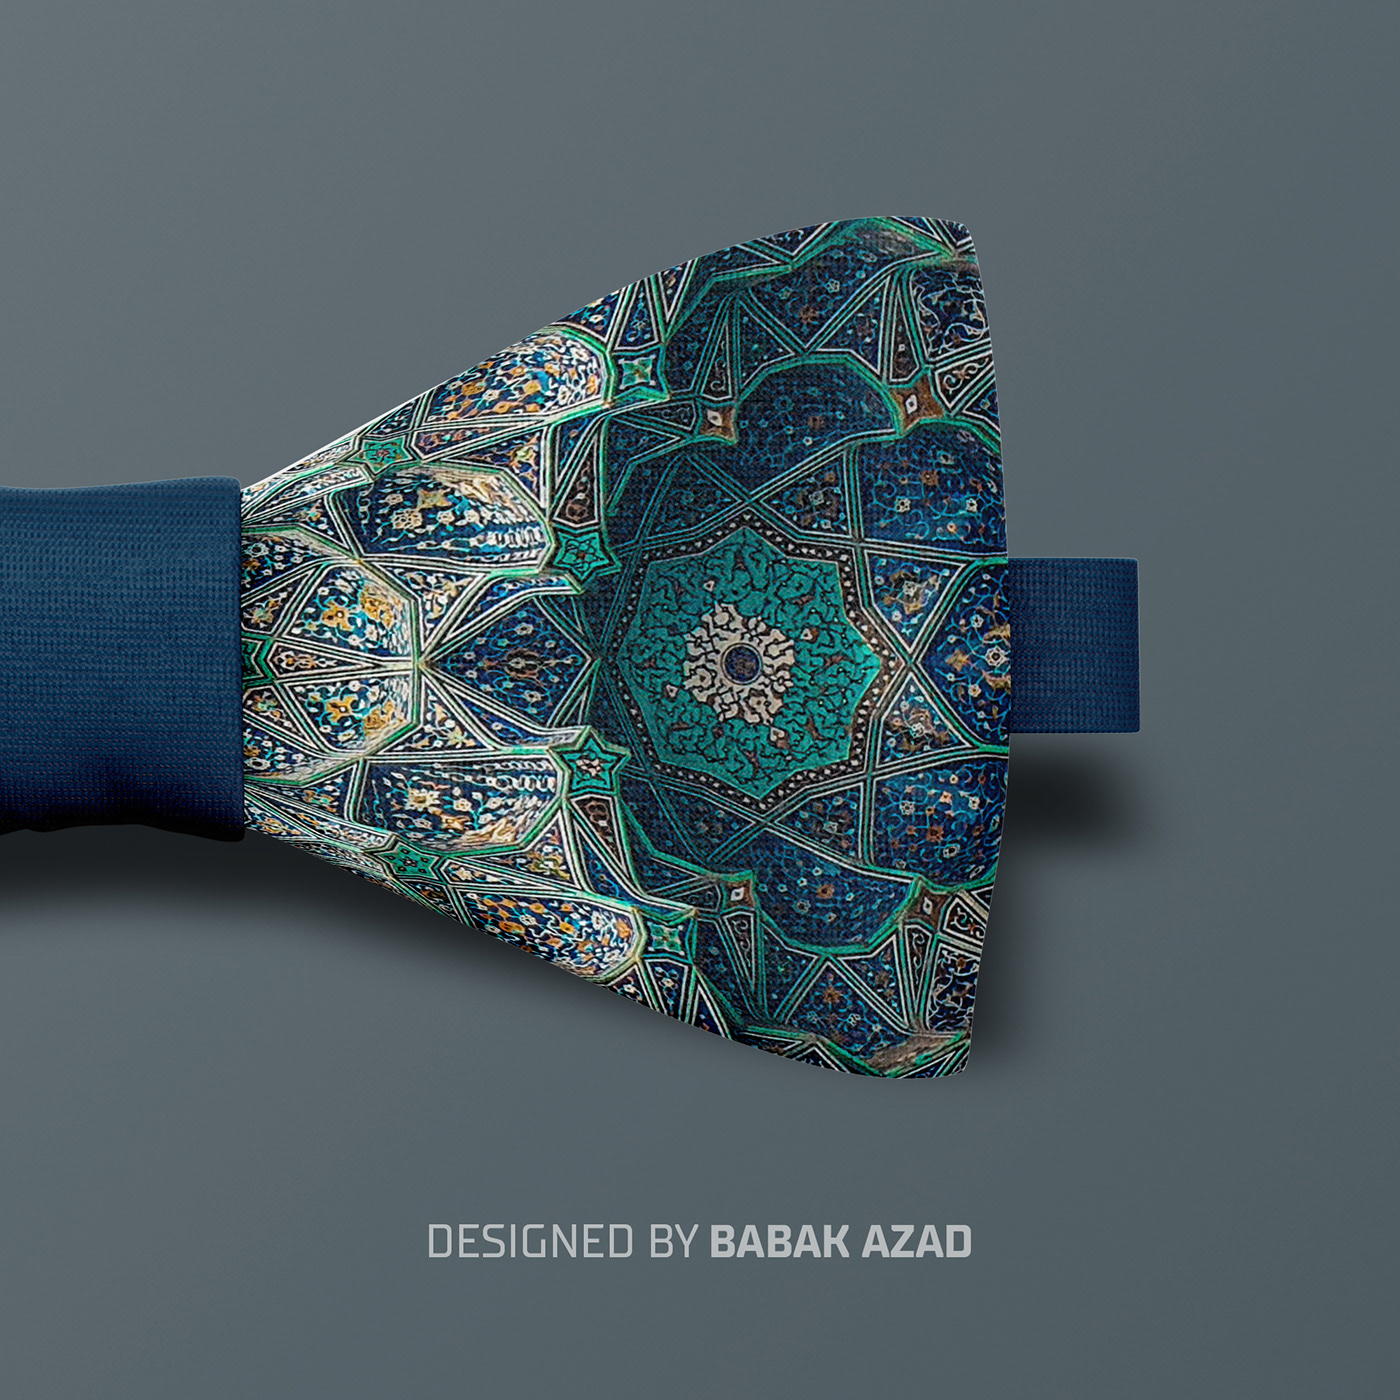 architecture bowtie fashion design Fashionstyling pattern persian styling  textile